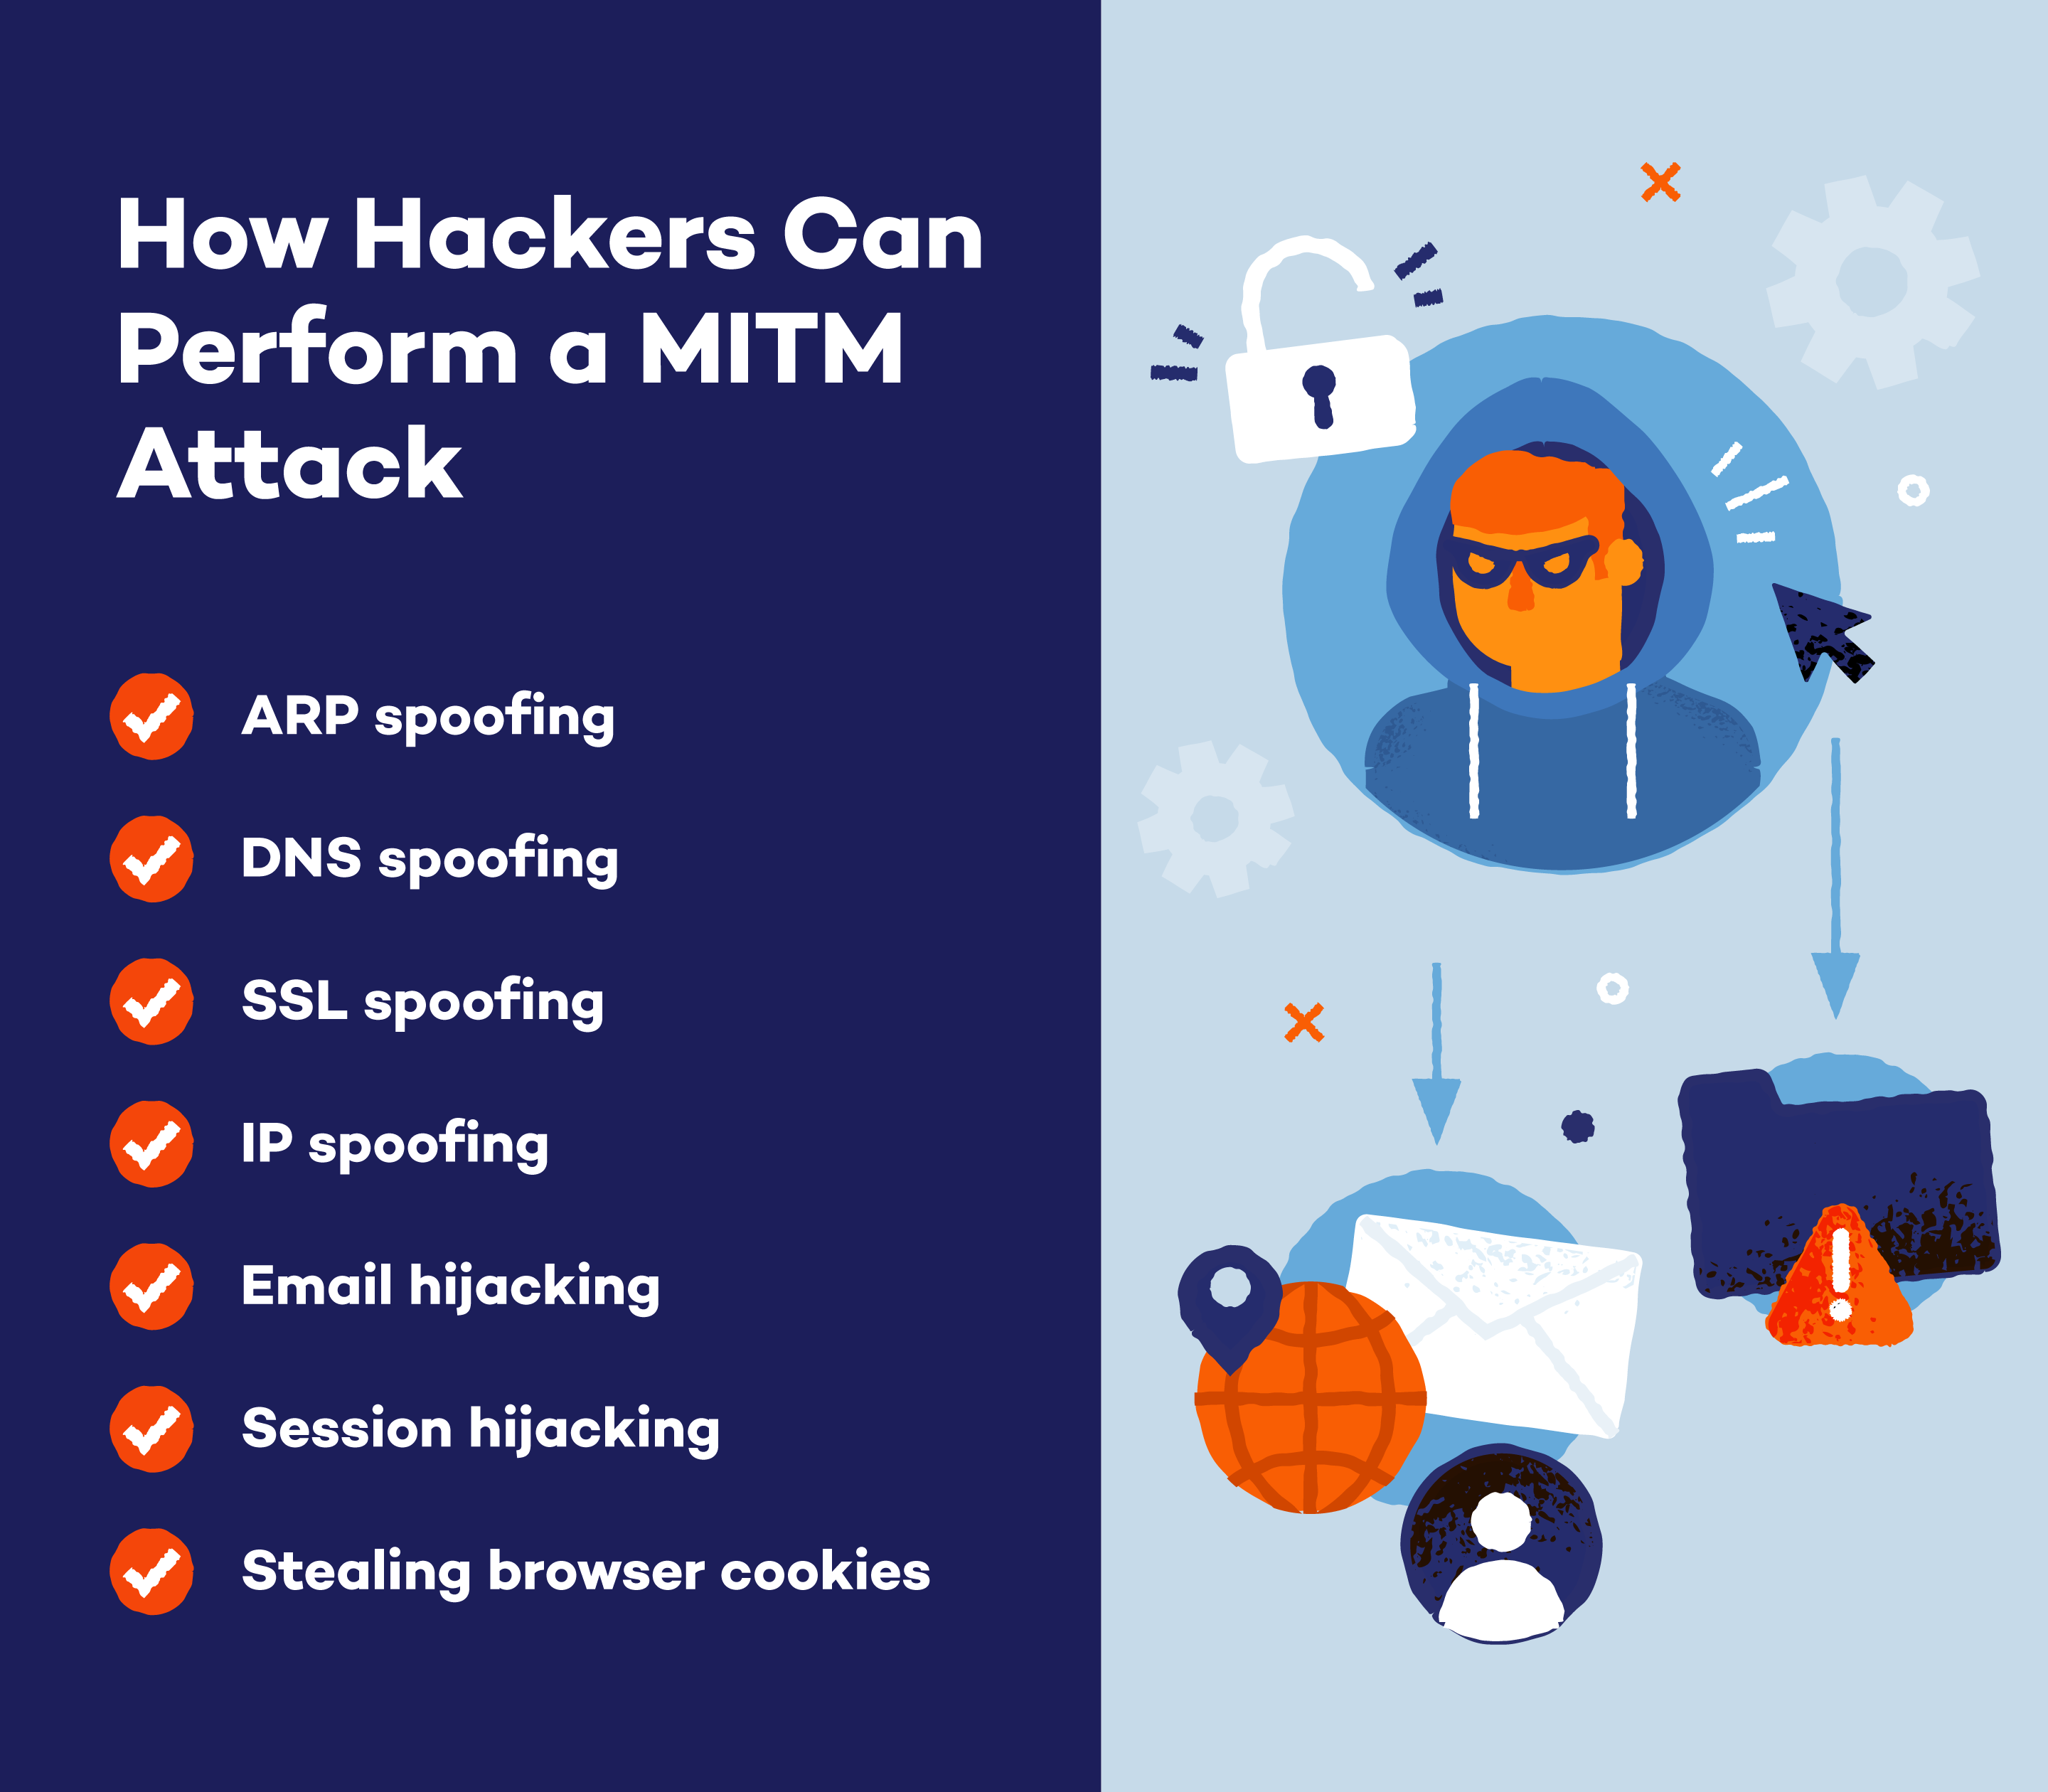 different ways hackers can perform the MITM attack